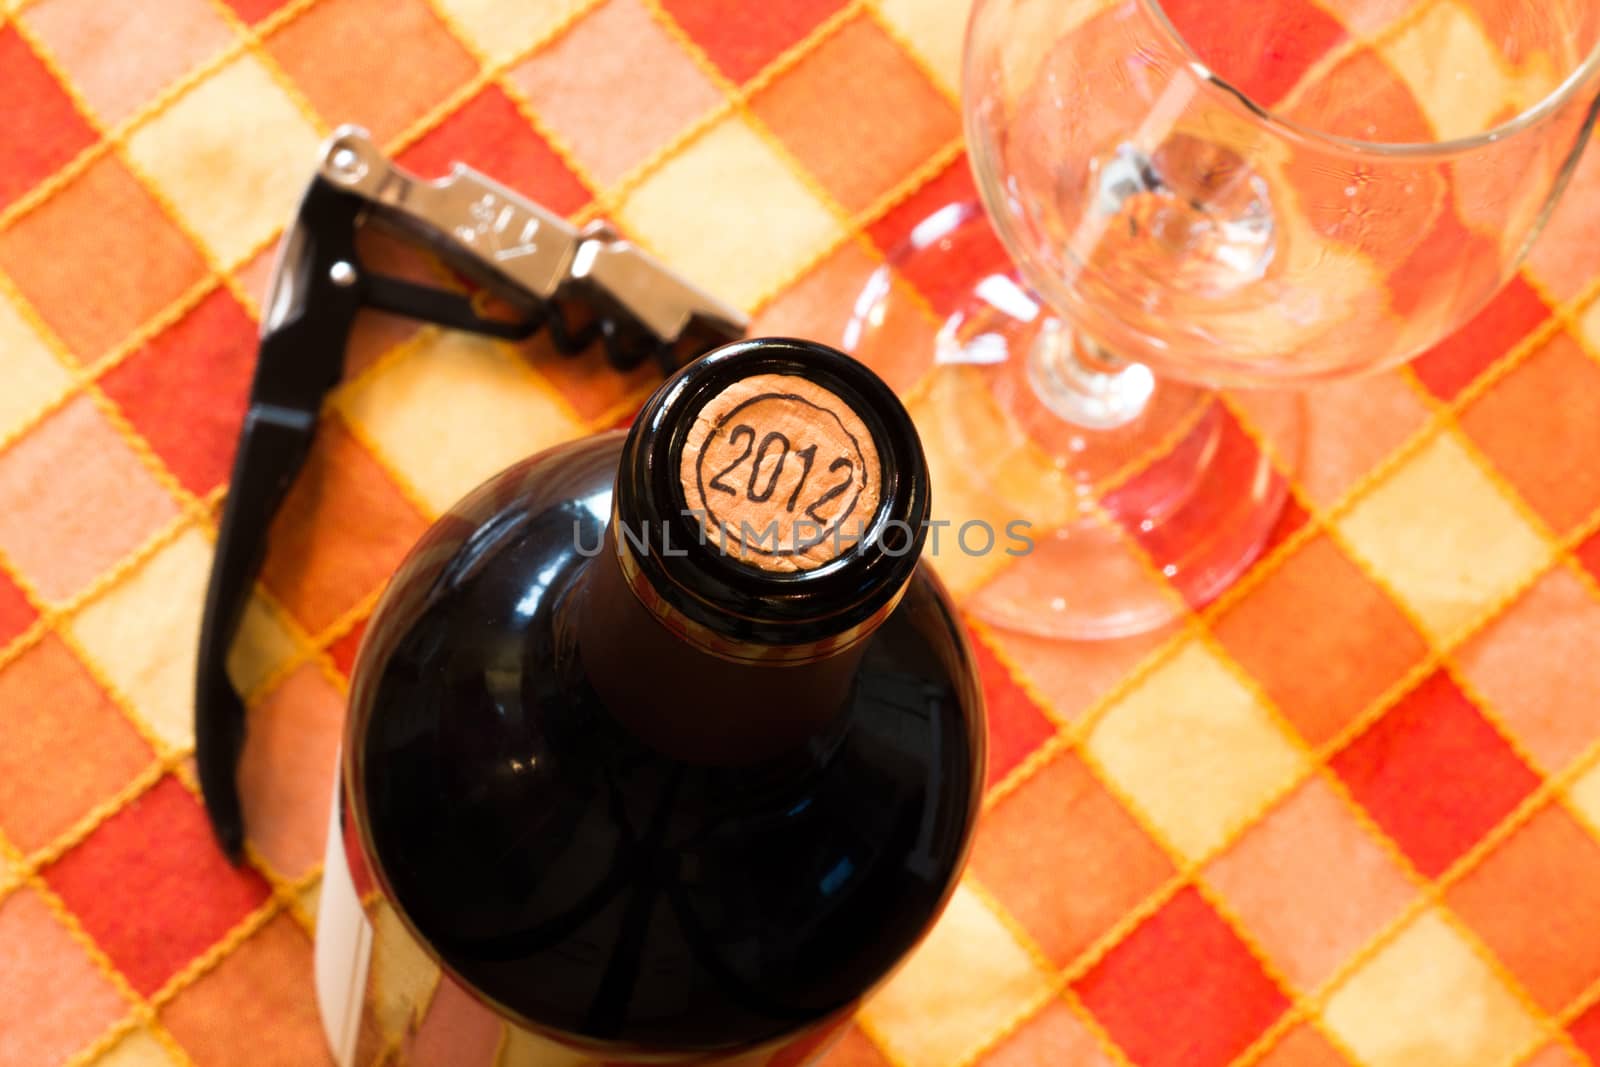 Bottle of wine in 2012 by Carbonas